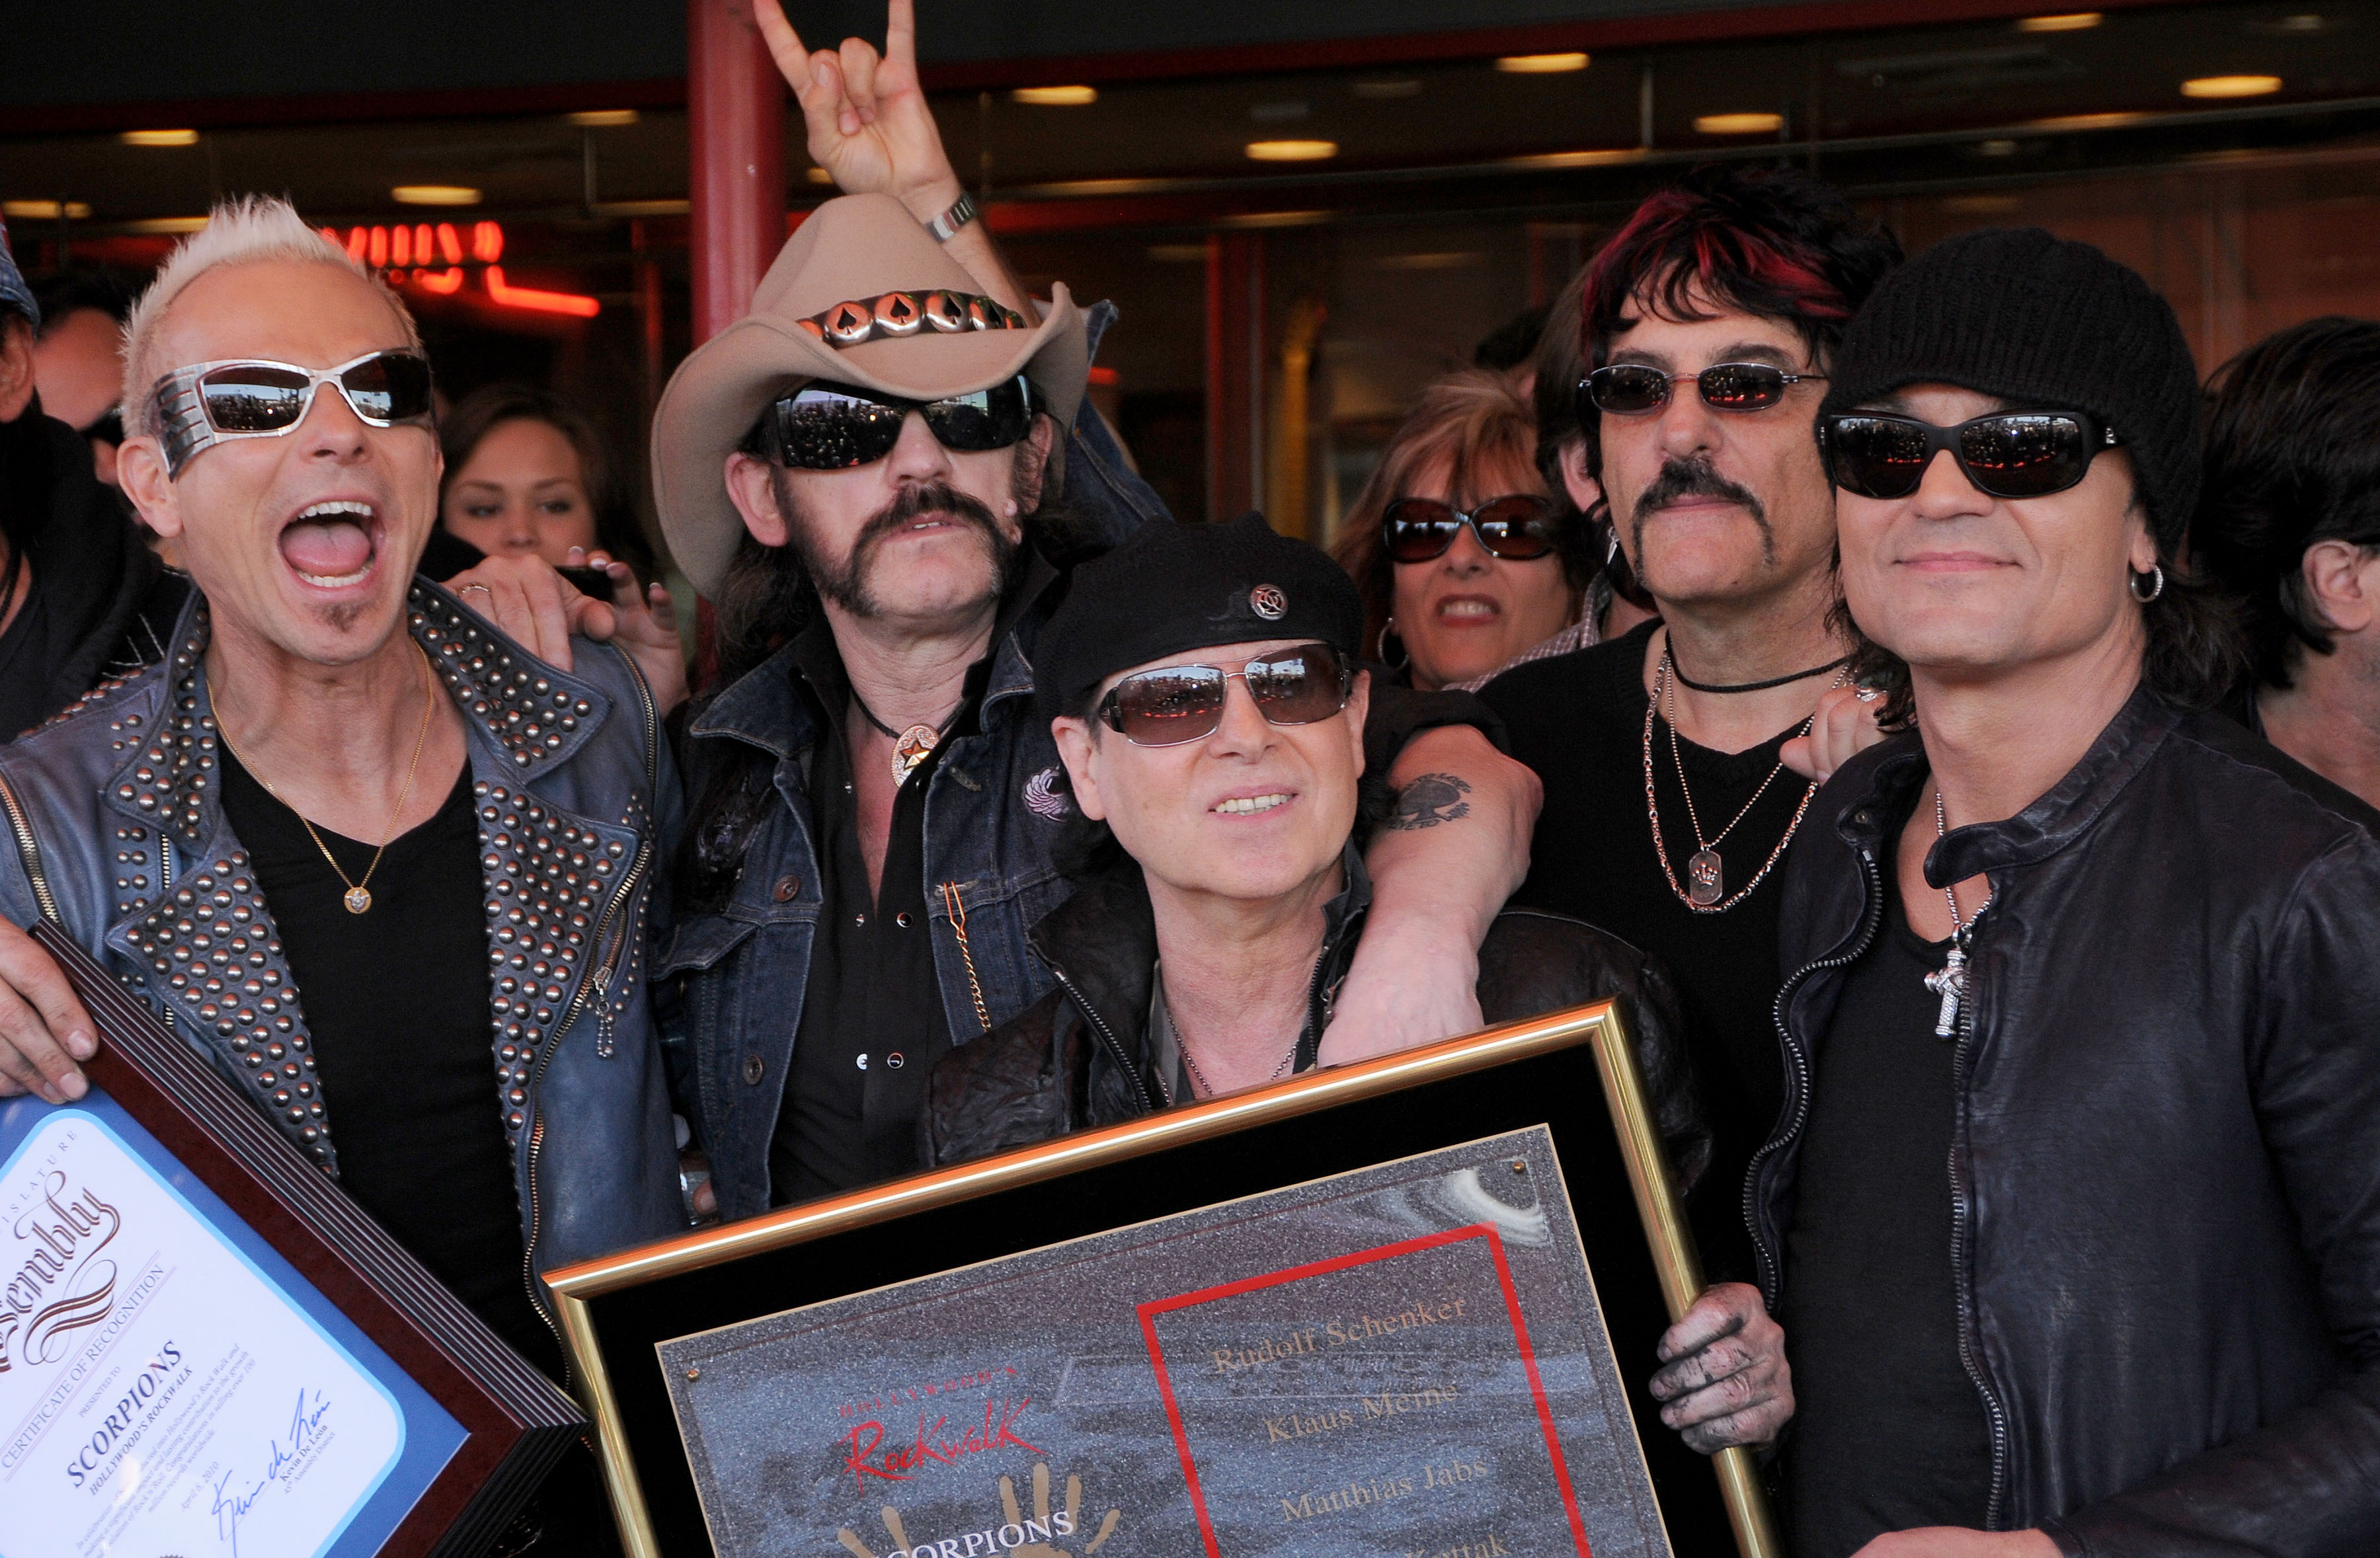 HOLLYWOOD, CA - APRIL 6: Rudolf Schenker, Lemmy of Motorhead, Klaus Meine, Carmine Appice and Matthias Jabs pose together as 